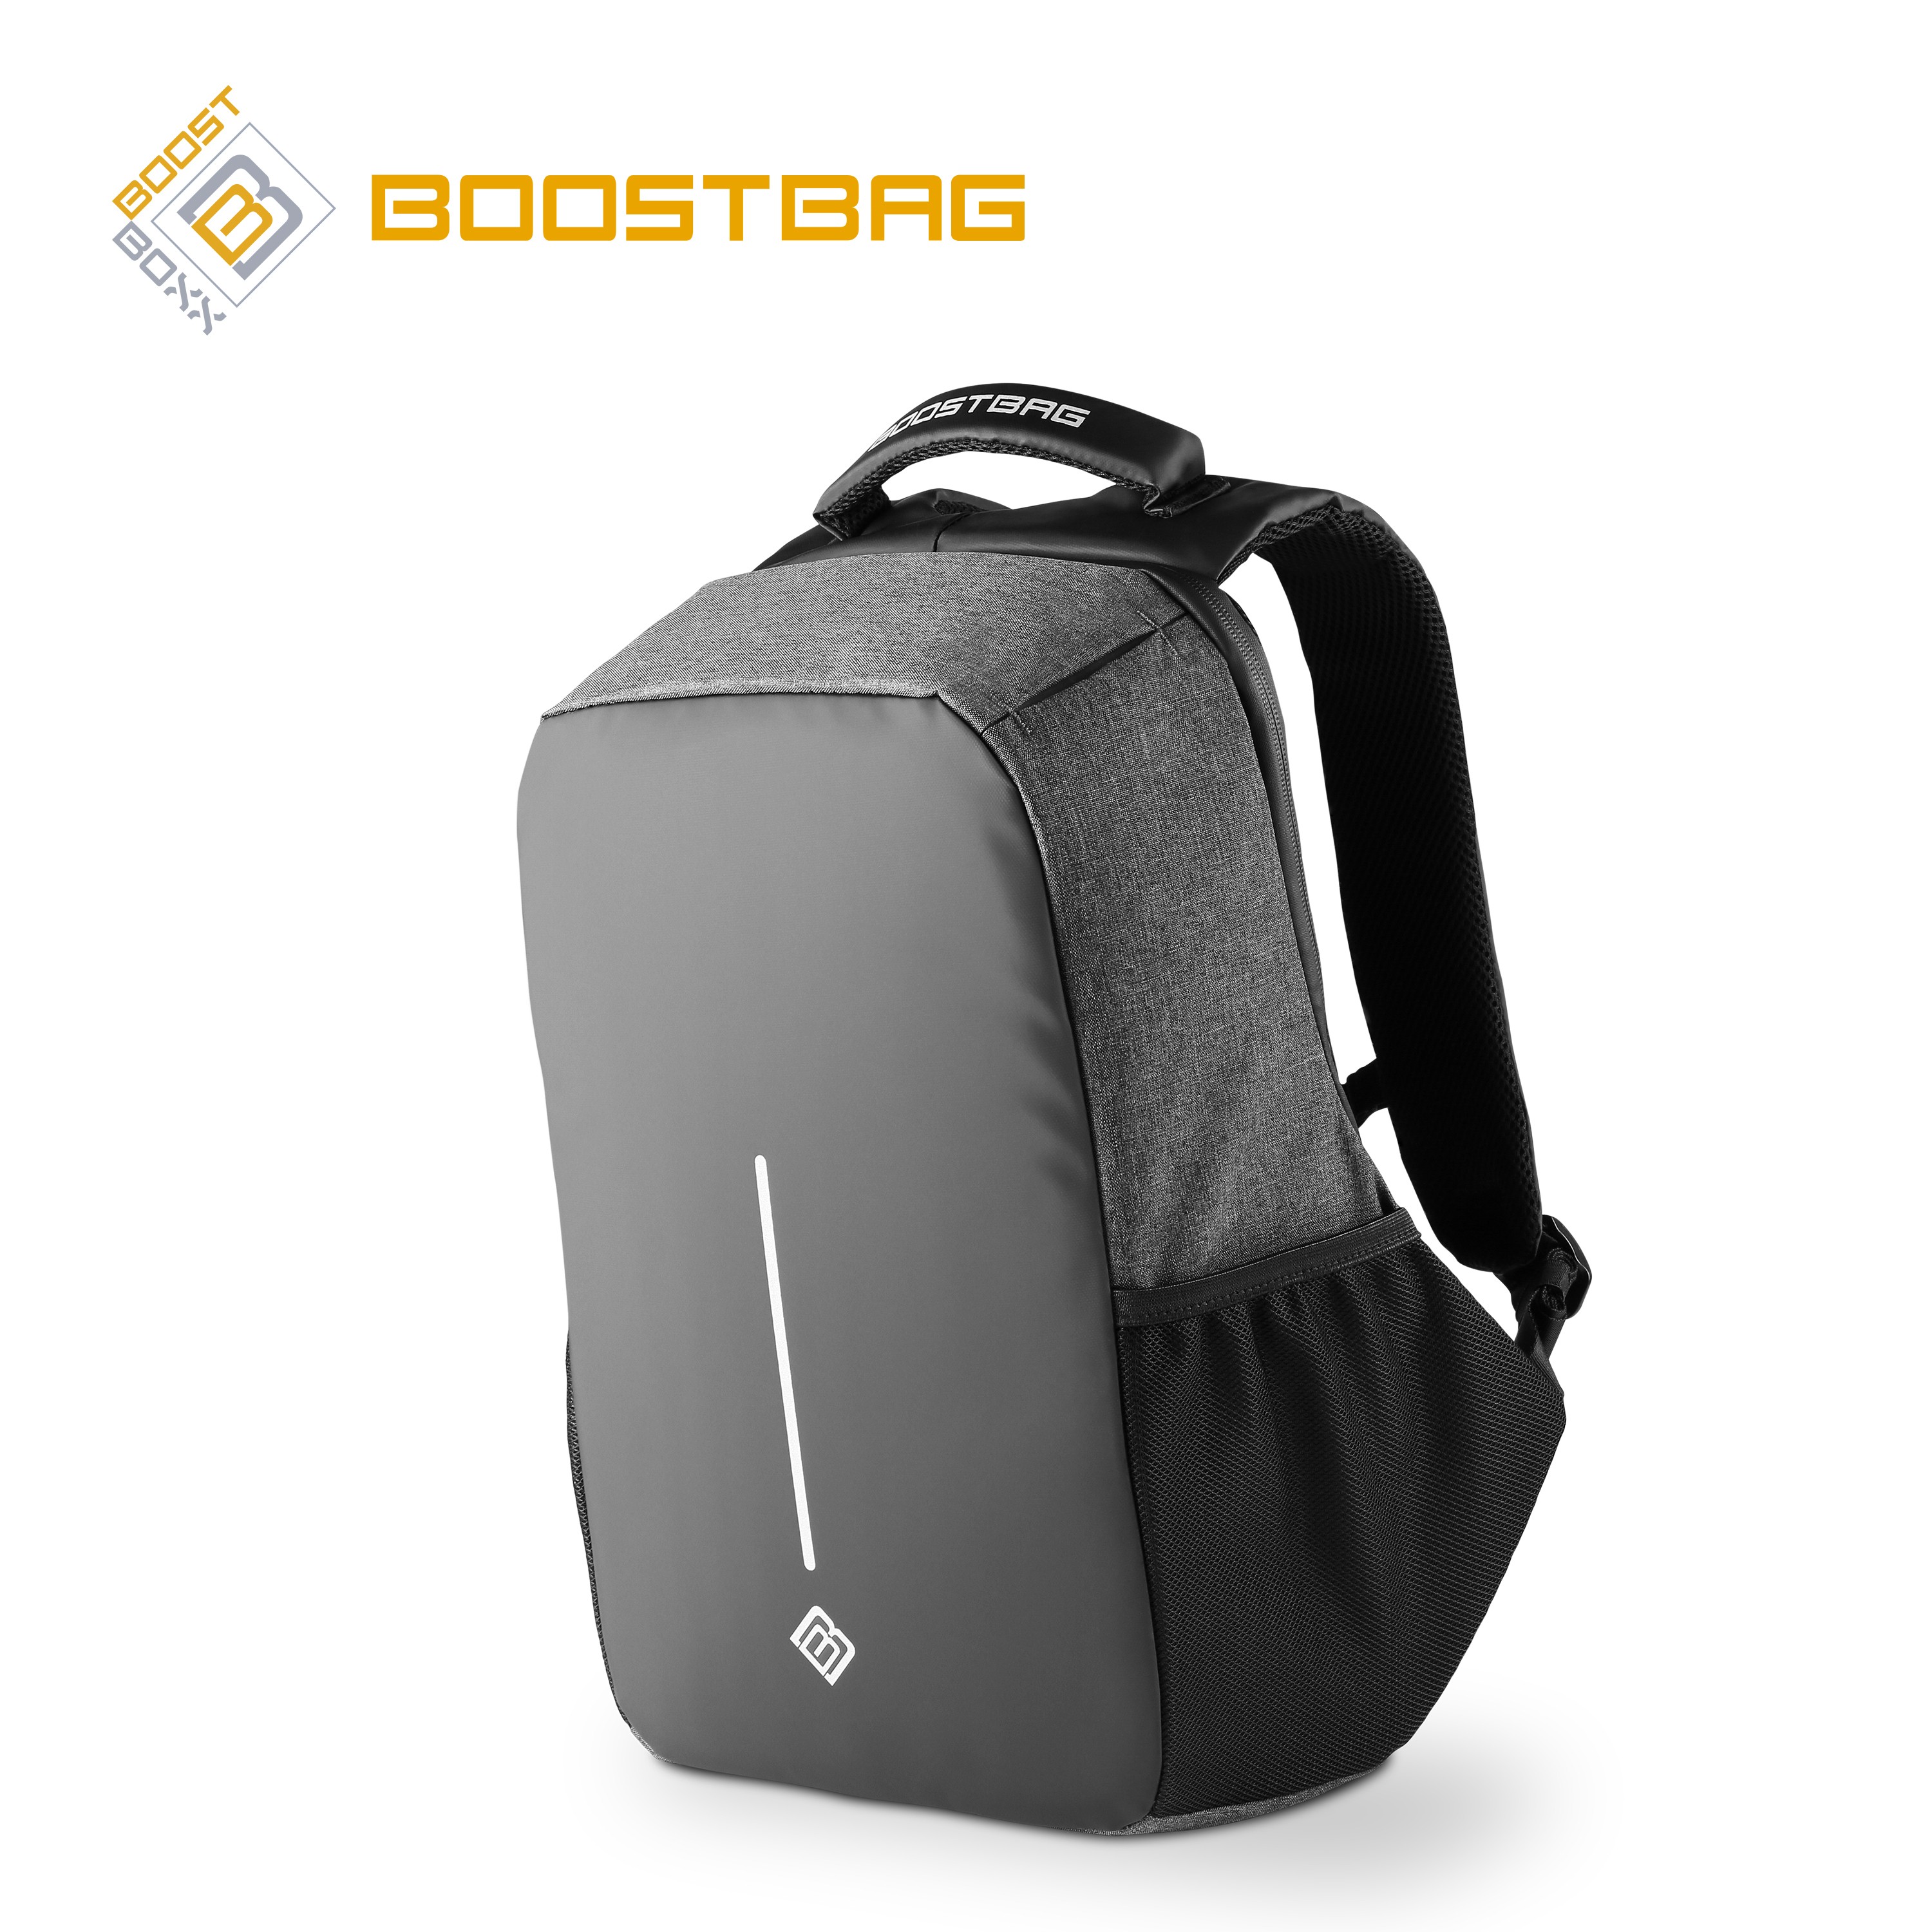 CSL Computer | backpack - Notebook to BoostBoxx BoostBag up